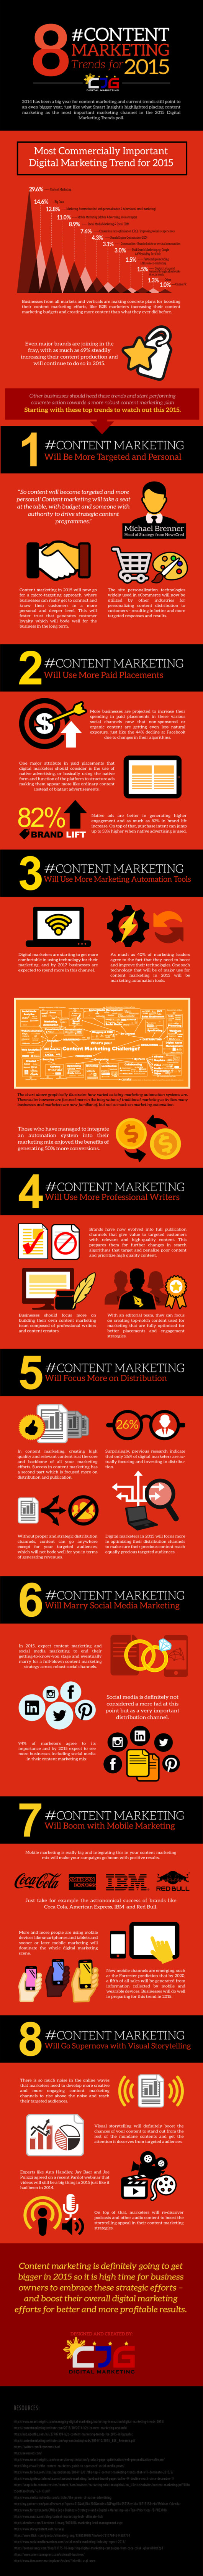 8 content marketing trends for 2015